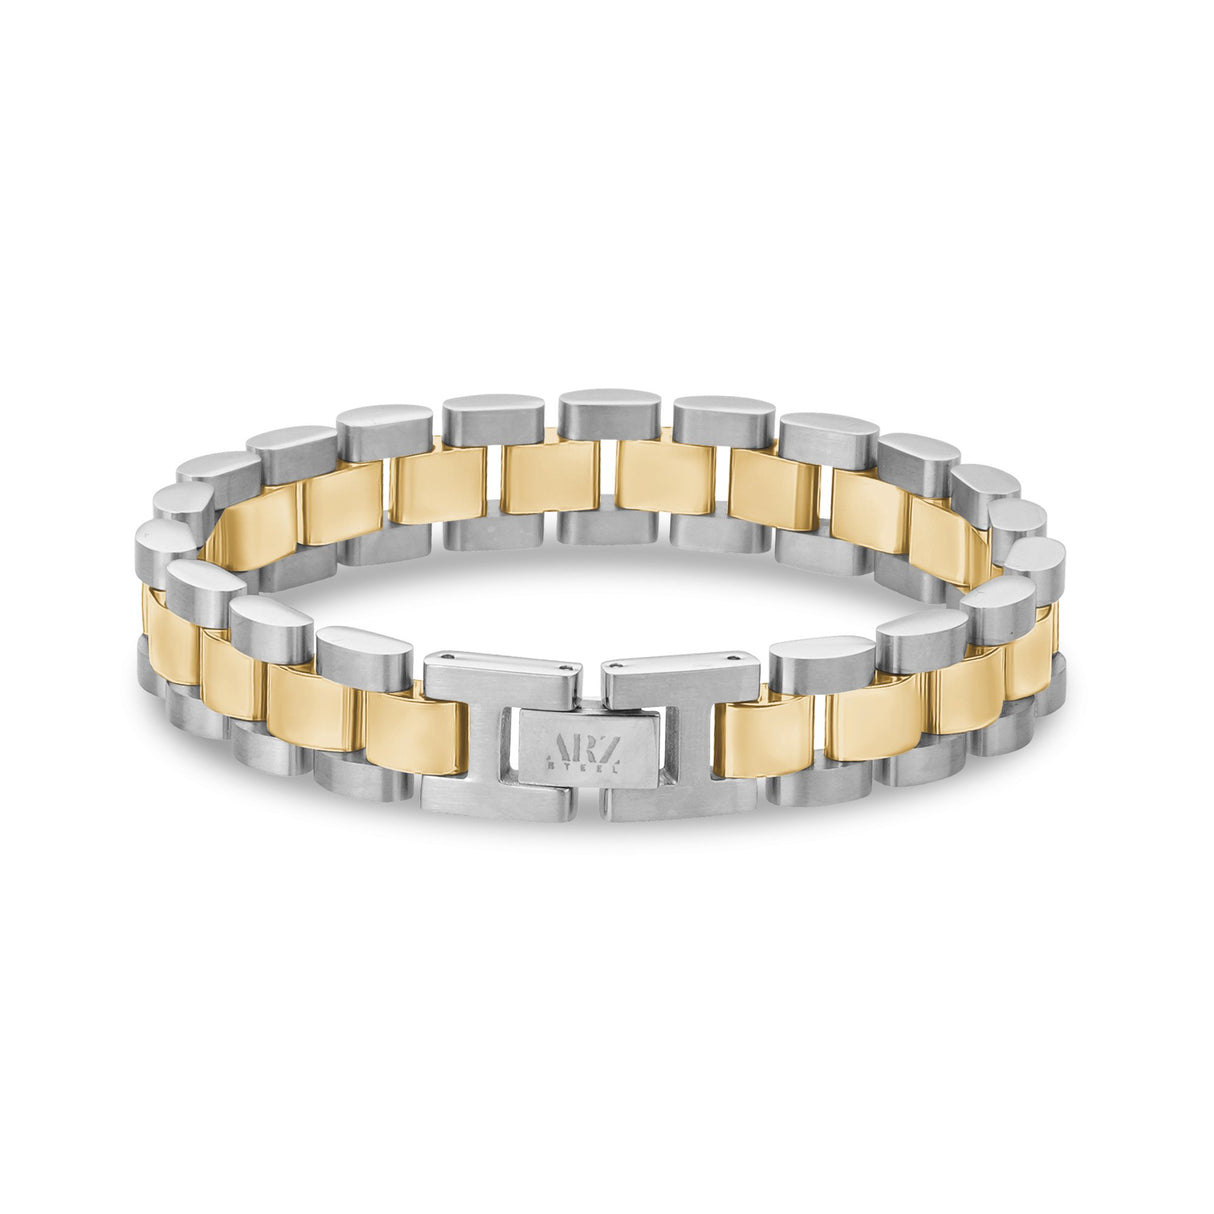 Two Tone Gold Stainless Steel Watch Link Bracelet – The Steel Shop